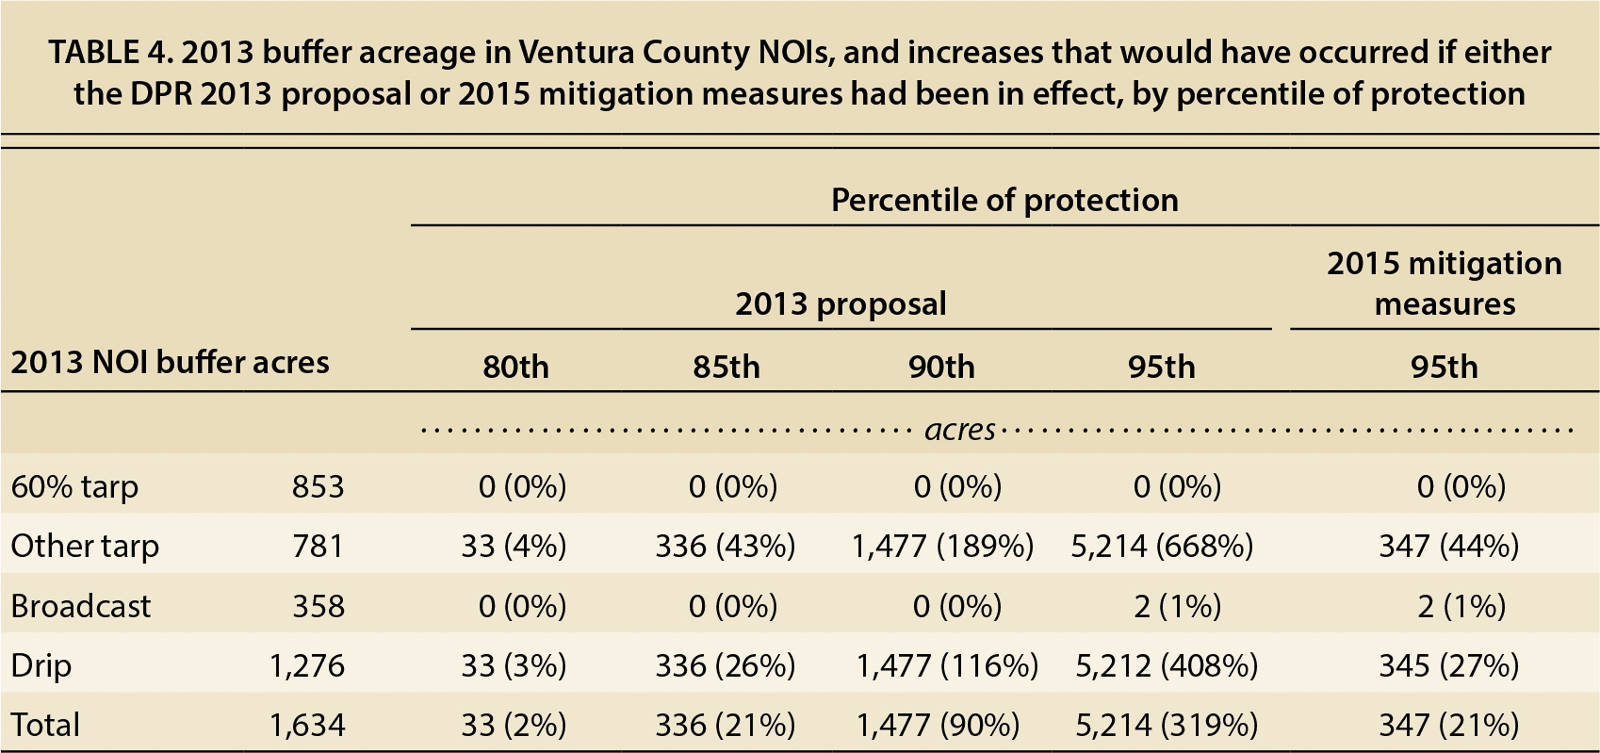 2013 buffer acreage in Ventura County NOIs, and increases that would have occurred if either the DPR 2013 proposal or 2015 mitigation measures had been in effect, by percentile of protection